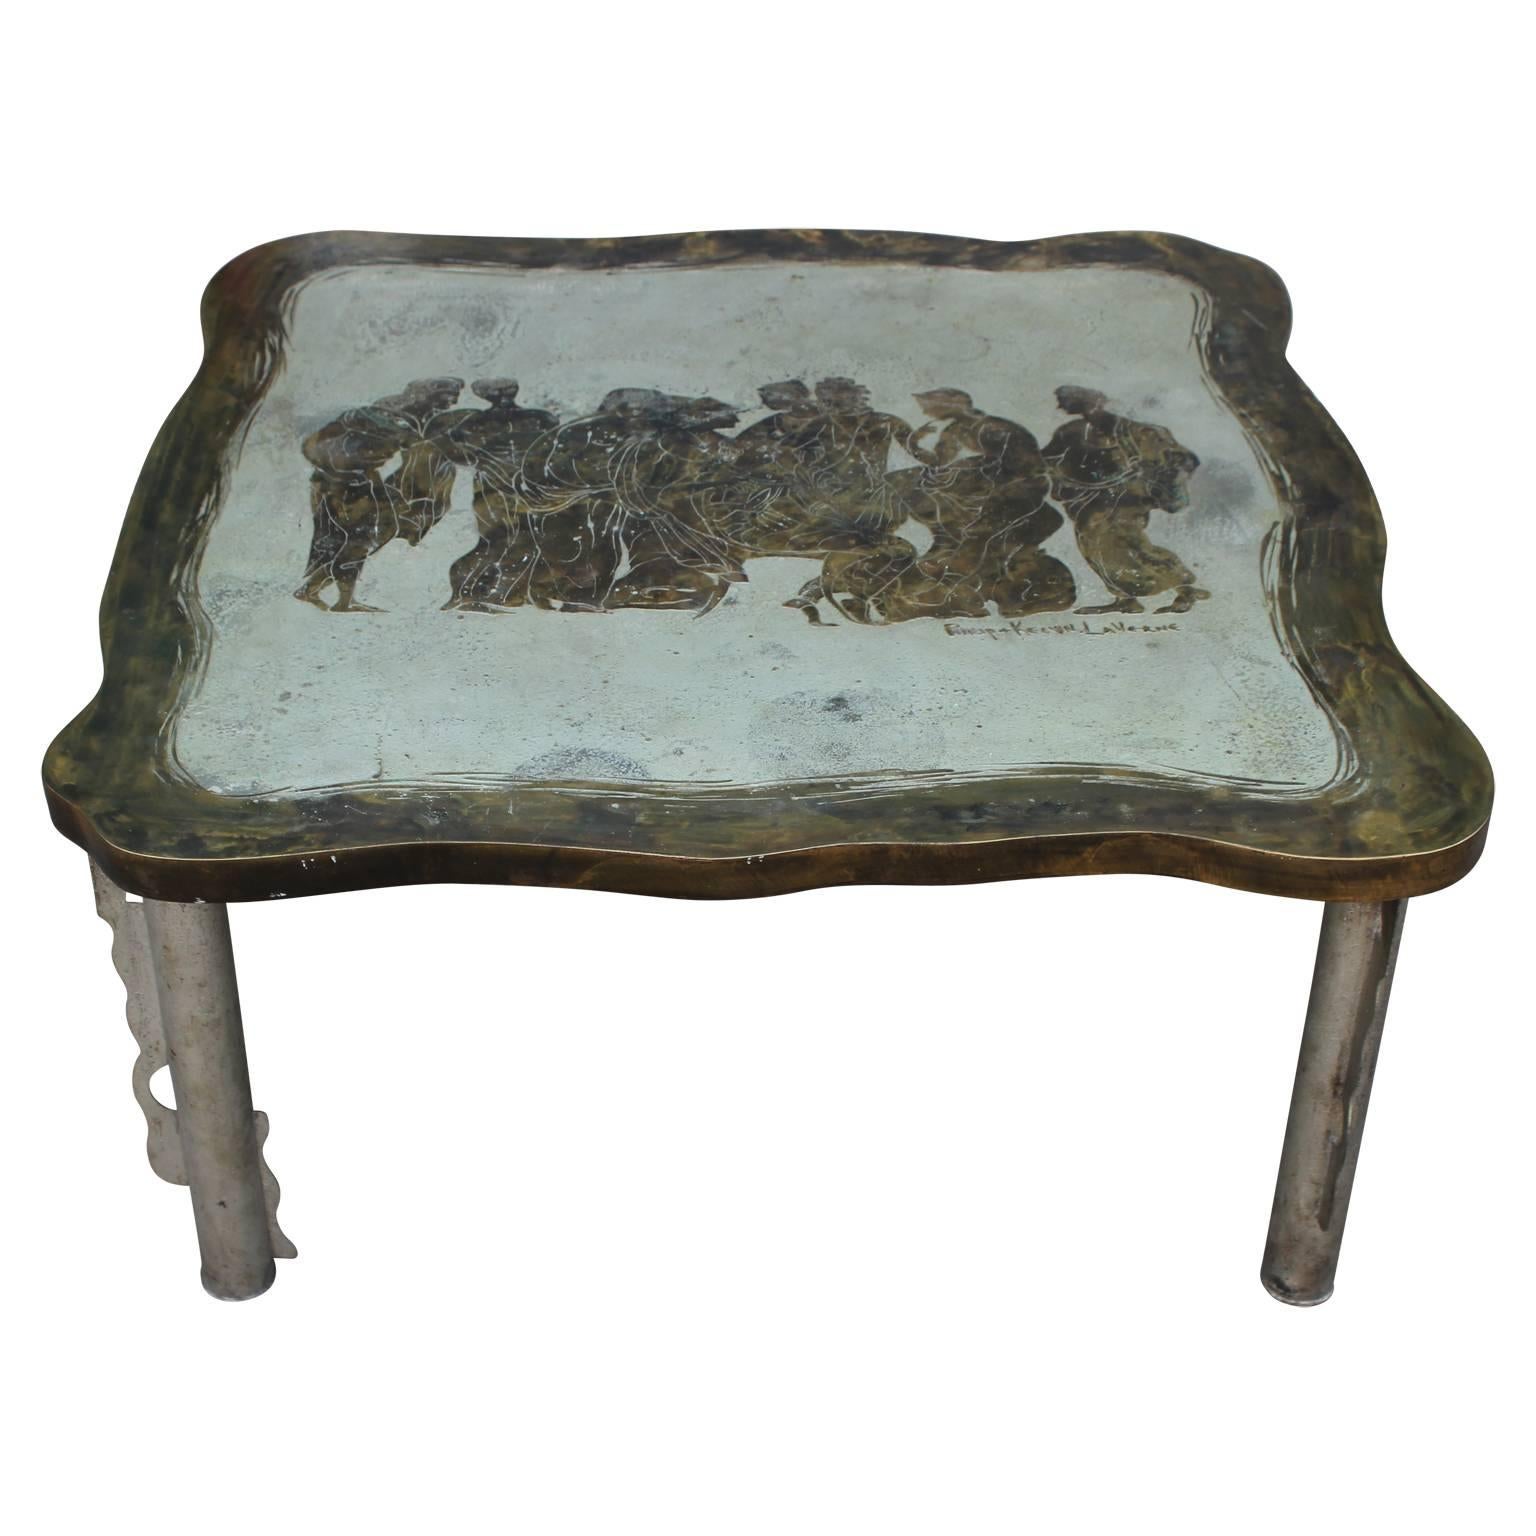 This is a bronze and pewter coffee table with acid-etched Etruscan motifs as an overlay. This table was designed by Philip and Kelvin LaVerne. The tubular legs and arched supporting buttresses are also enameled and patinated with LaVerne signature